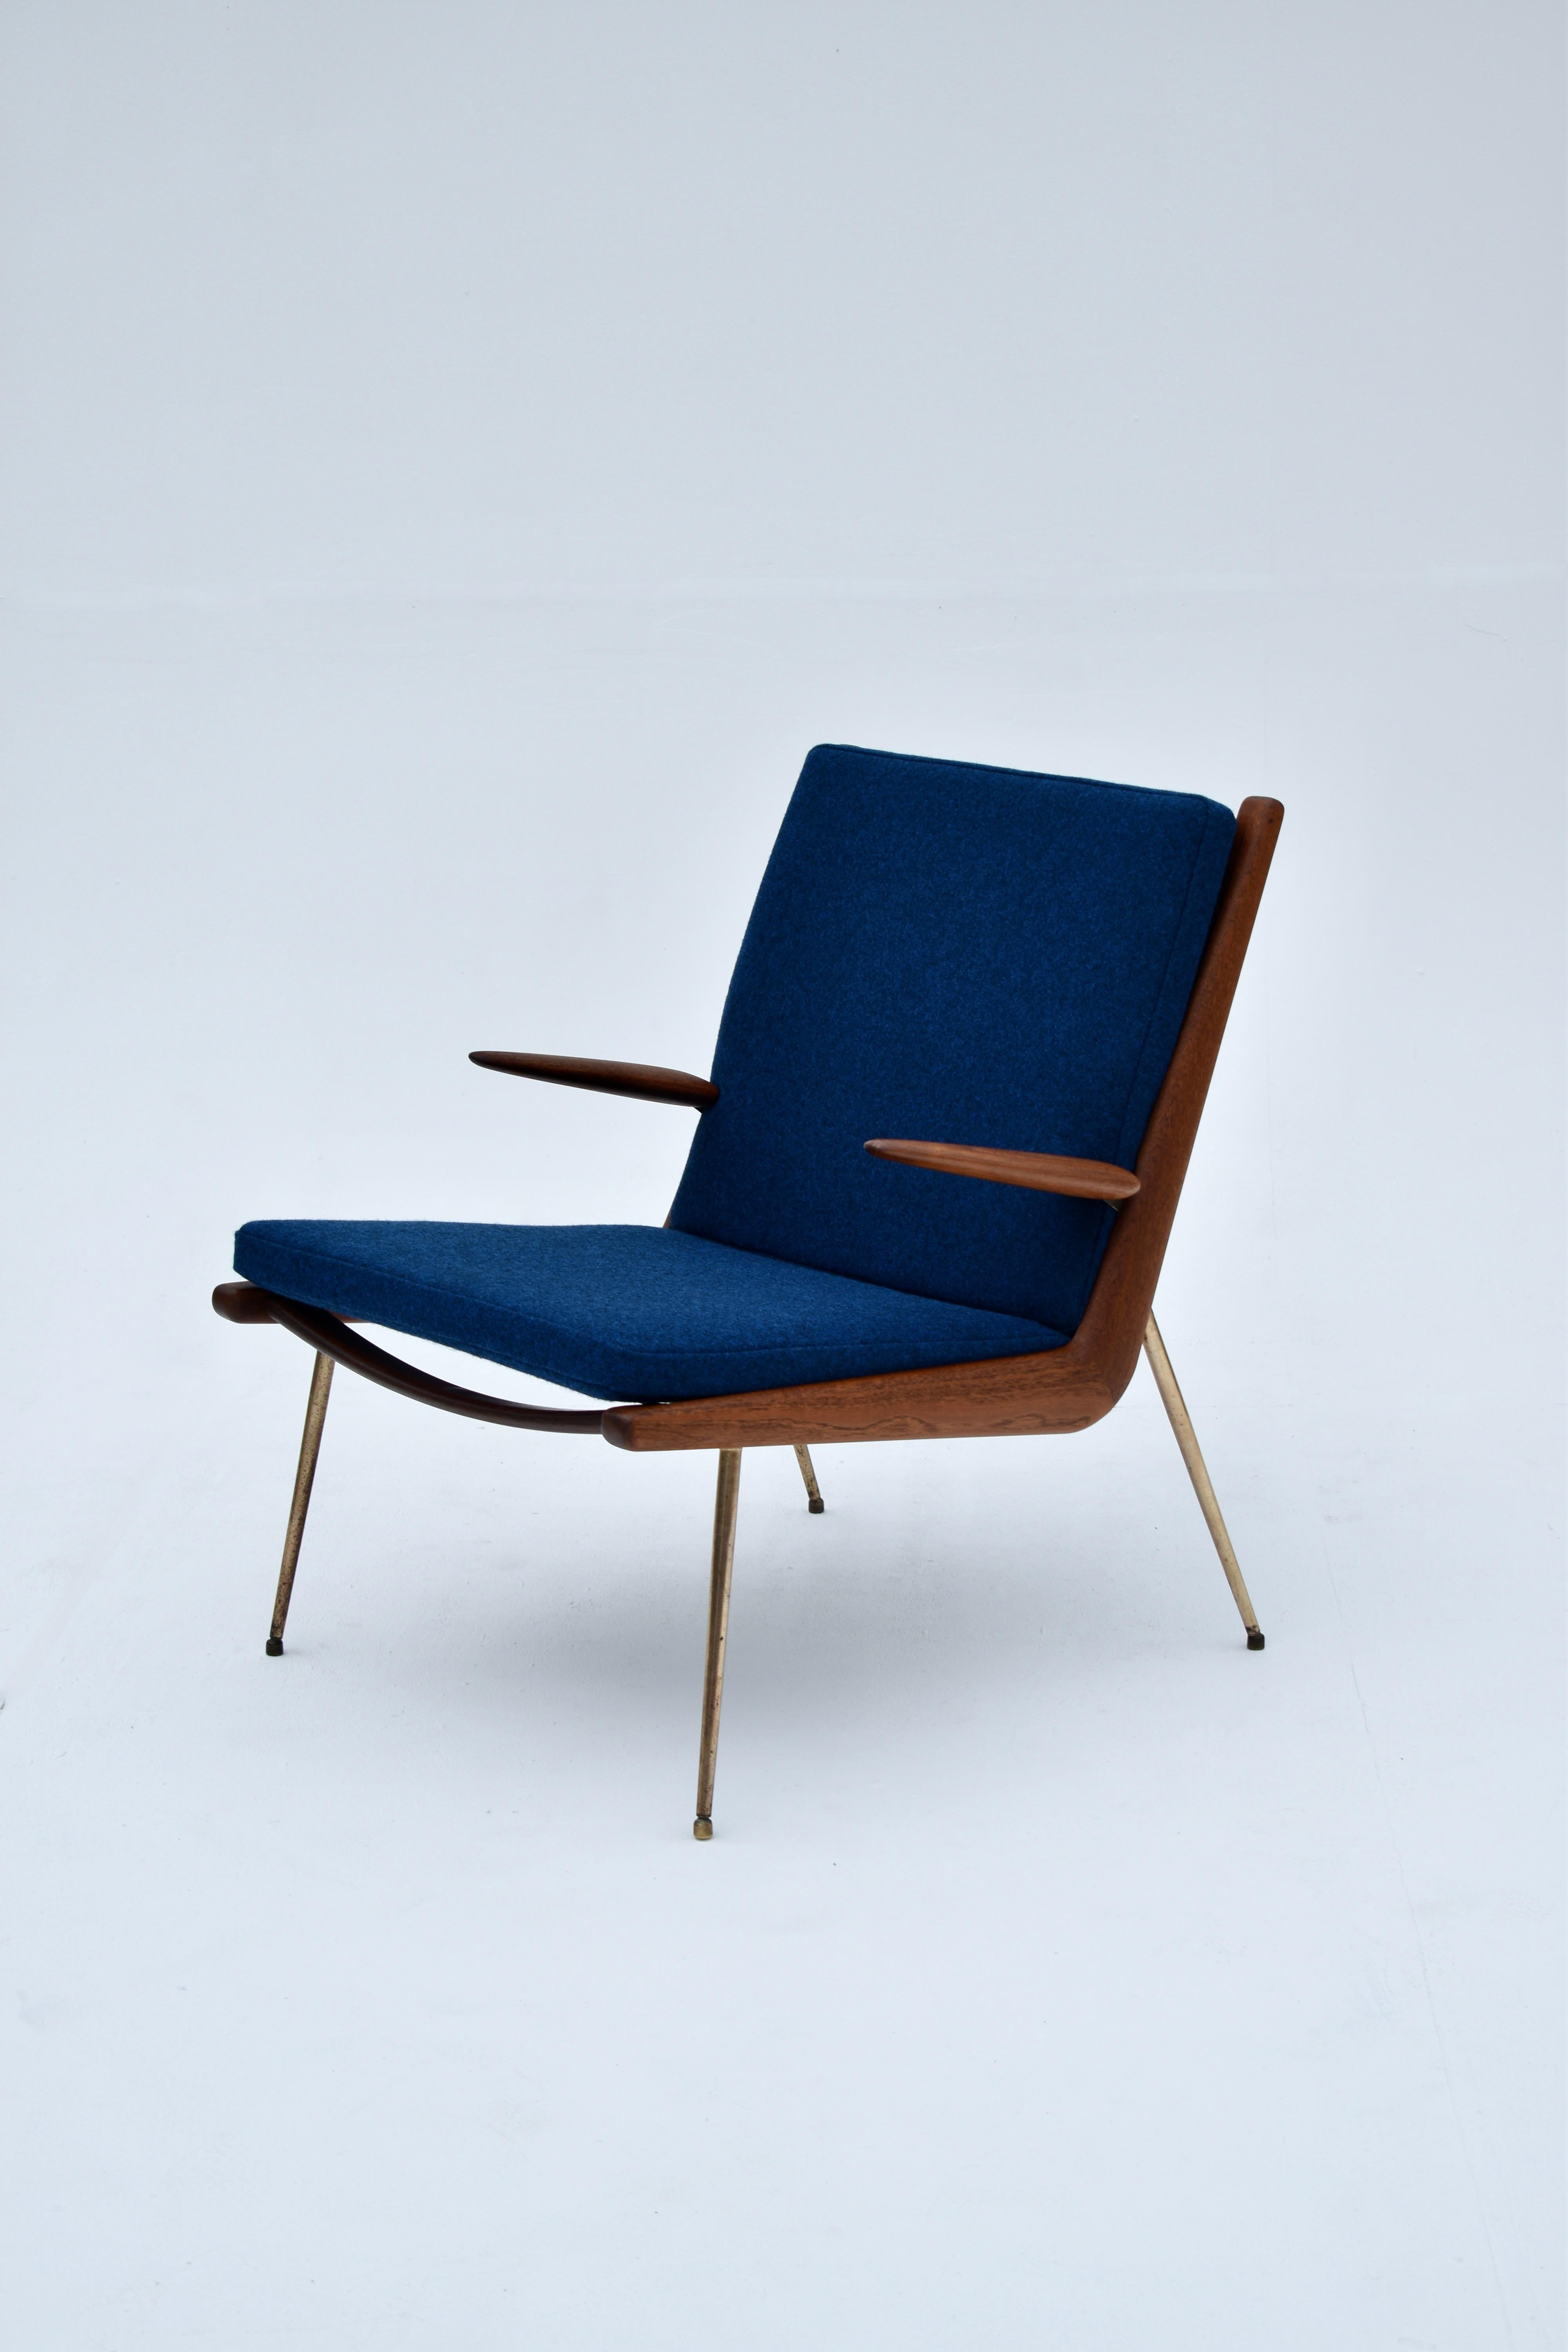 Designed by Architects Peter Hvidt & Orla Molgaard Nielsen in 1954 the Boomerang chair is one of the most elegant chair designs of the Mid Century period.

Often looking more Italian than Danish in origin the beautifully crafted frame stands on